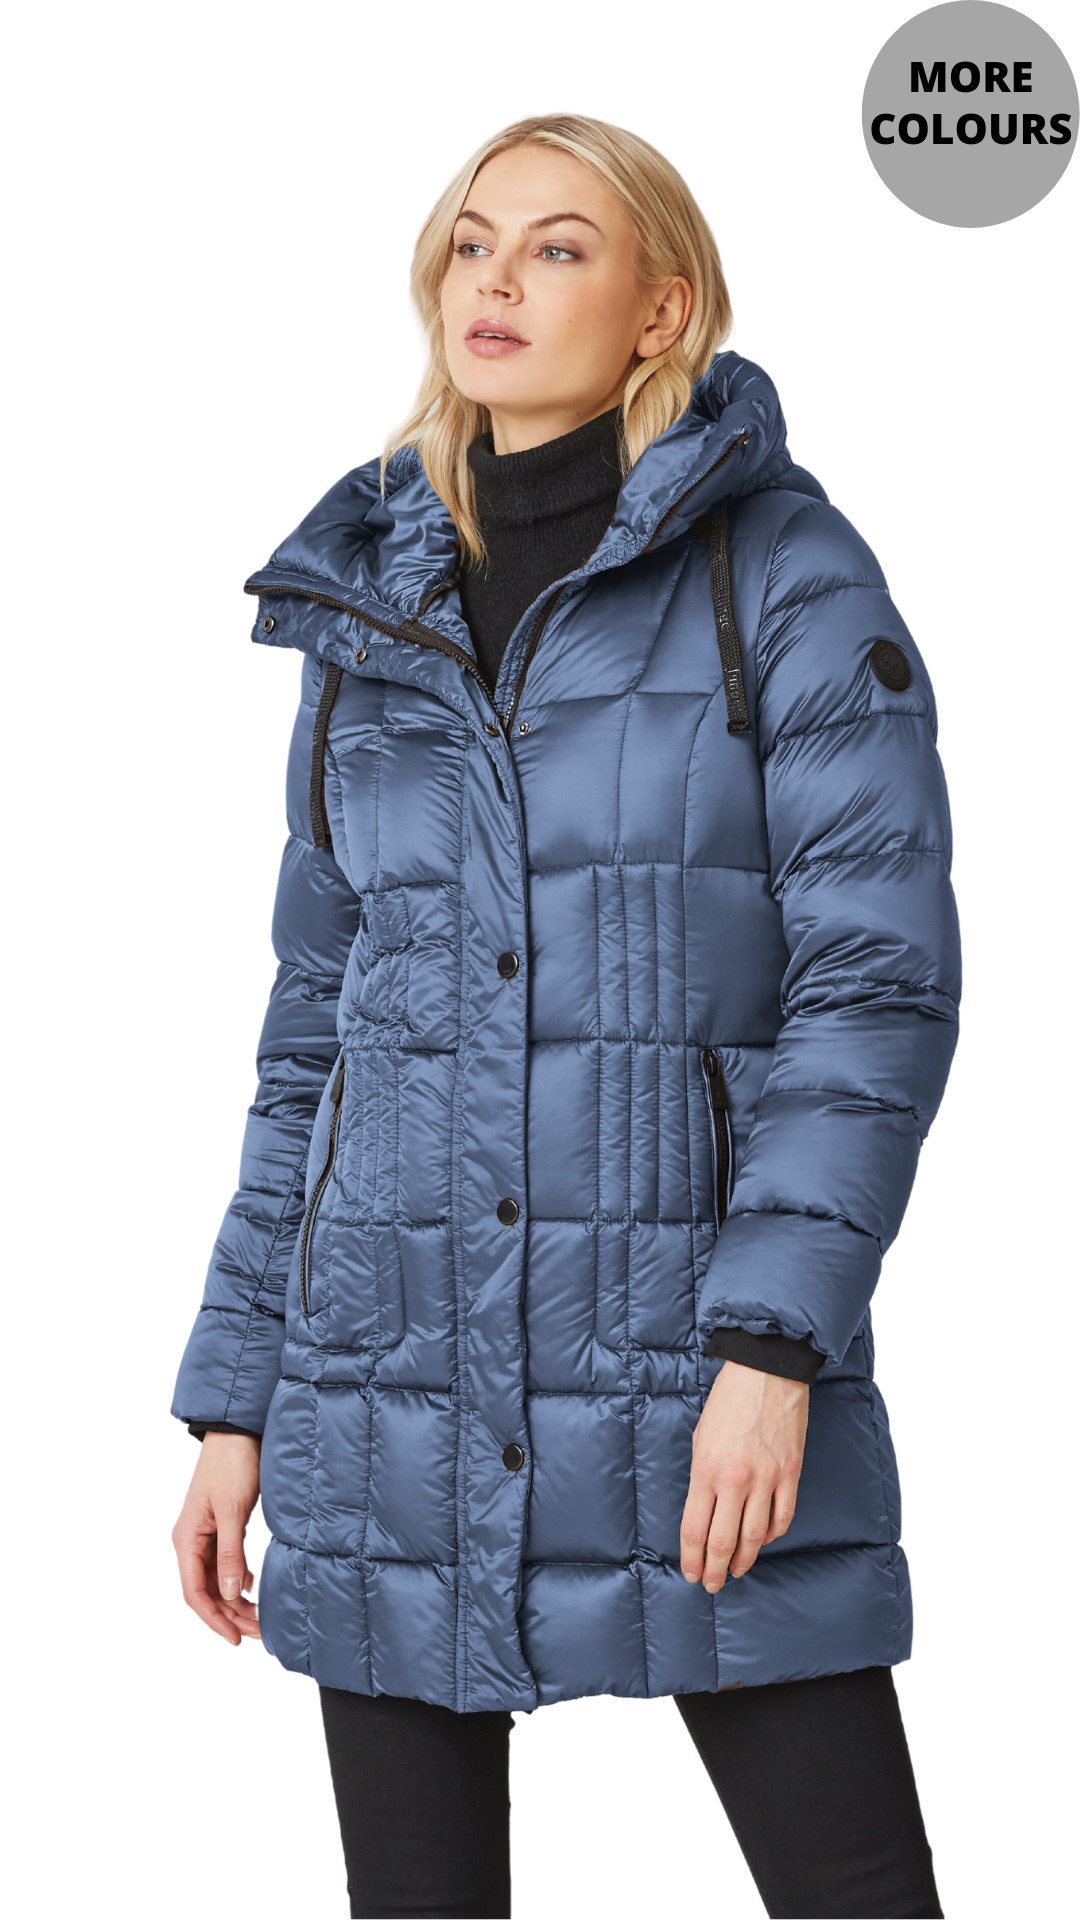 Grid Quilted Lightweight Down FIlled Outerwear. Style JUN2244